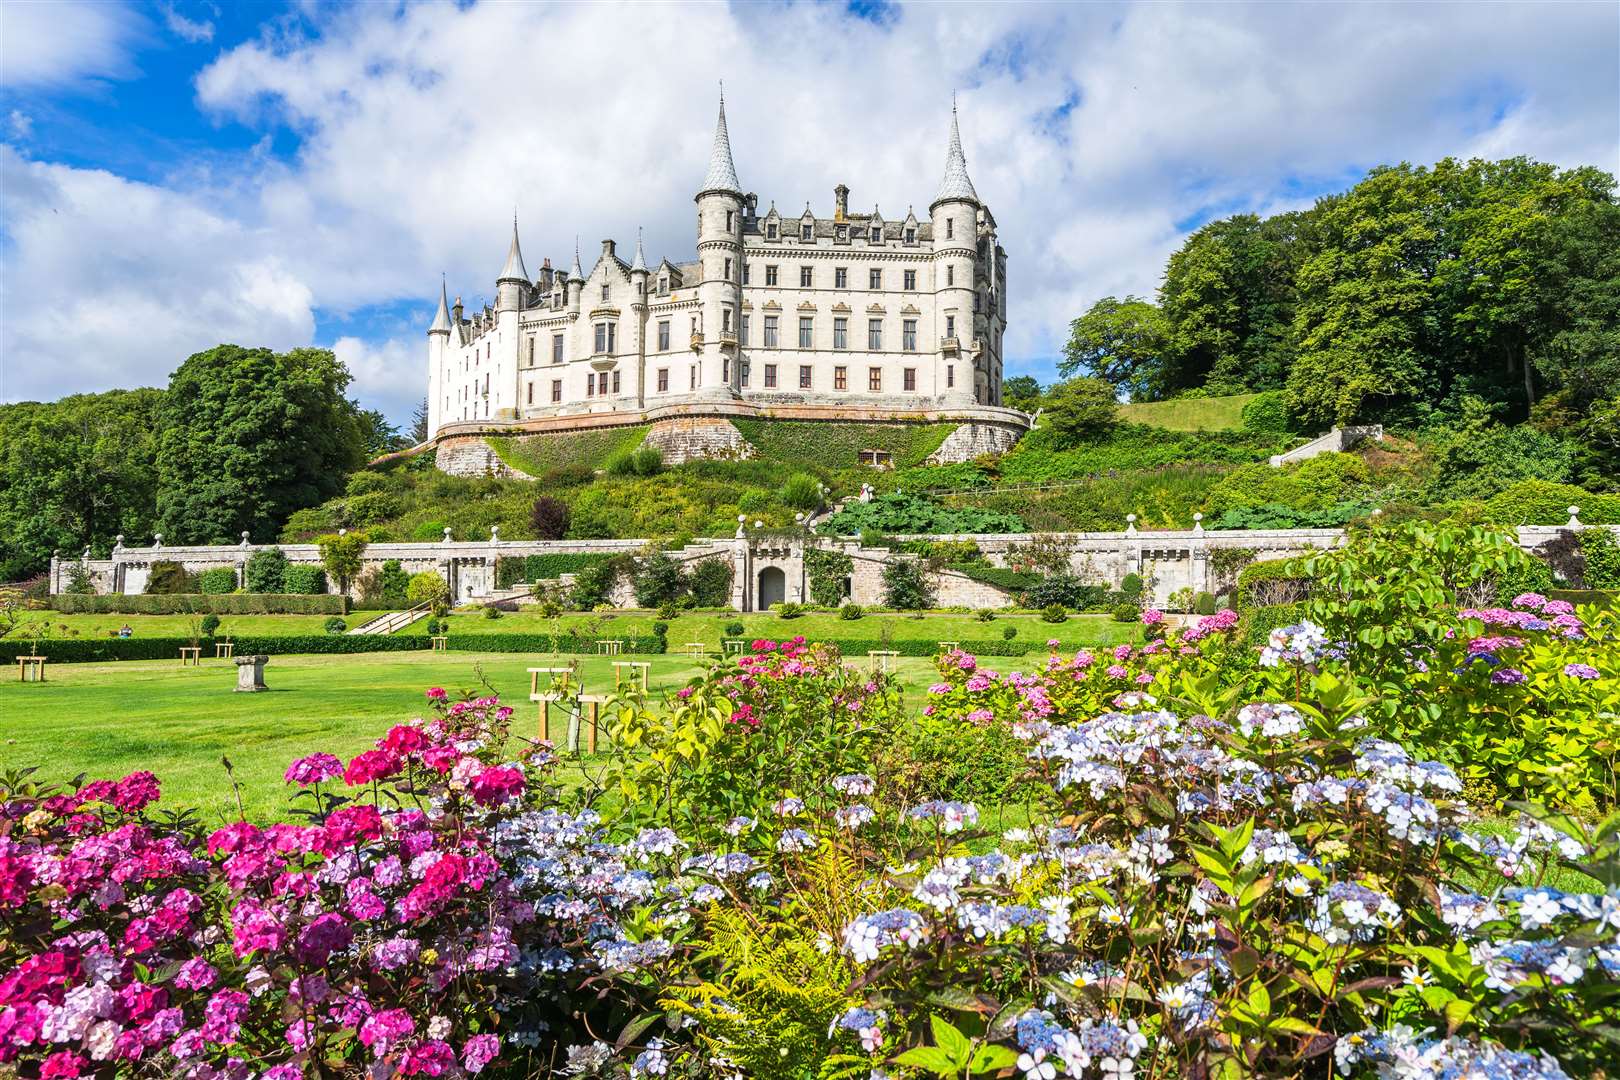 The beautiful Dunrobin Castle on a sunny day